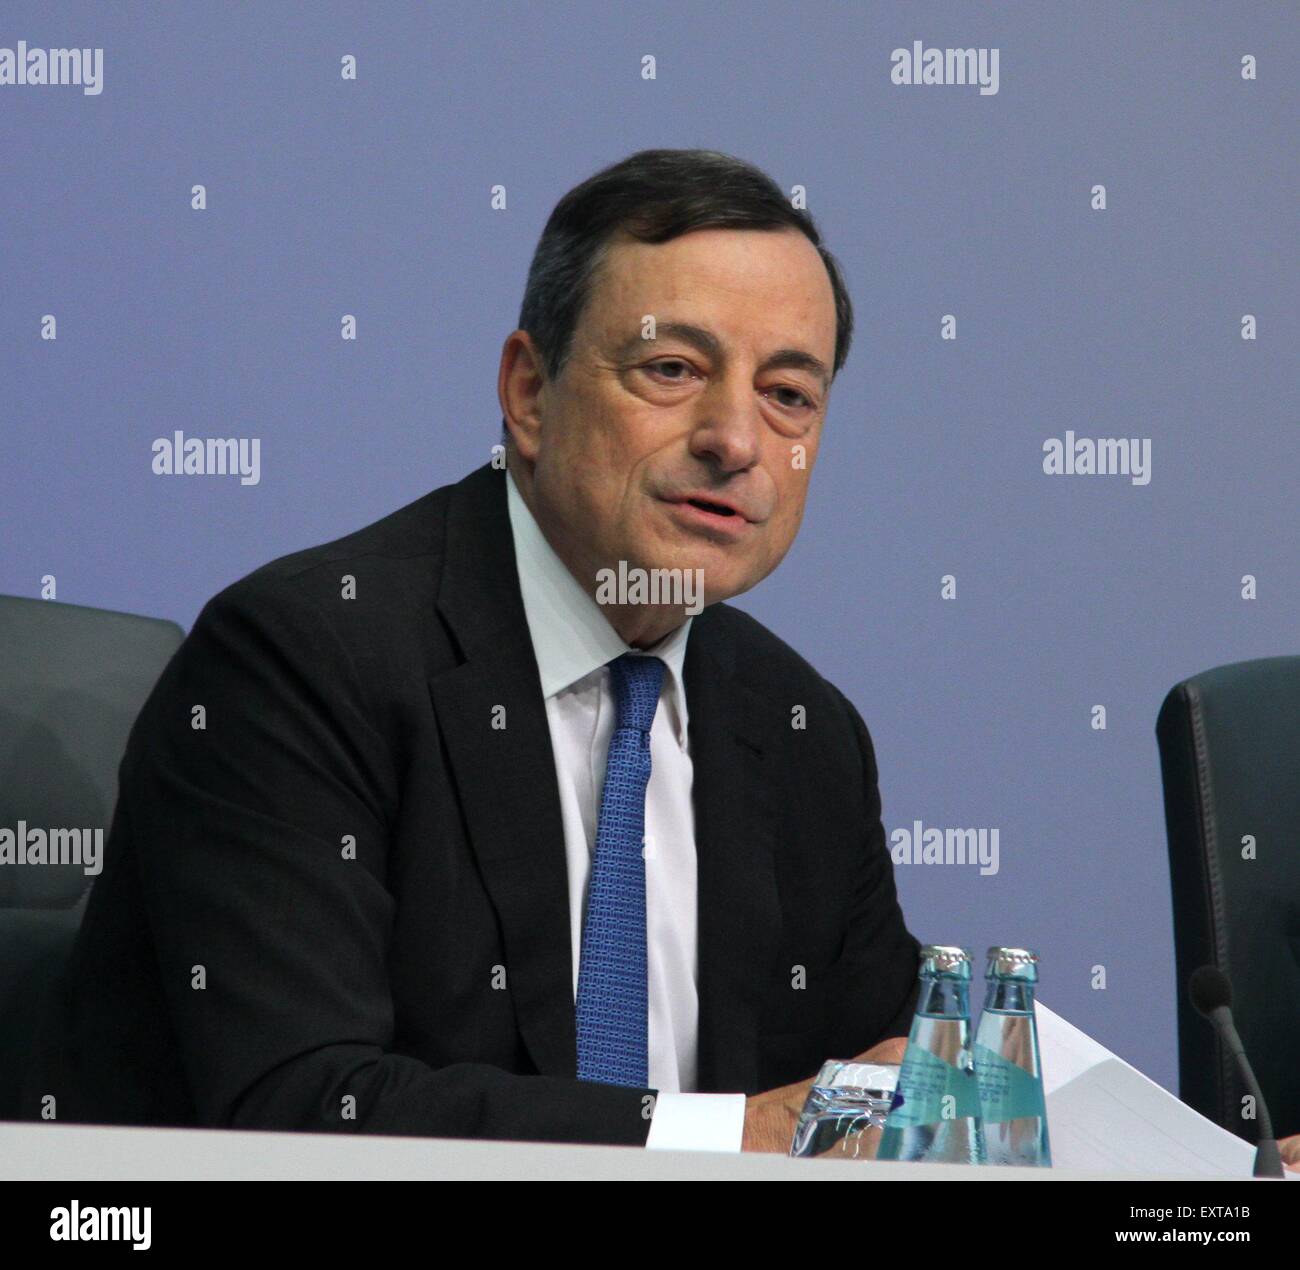 Frankfurt, Germany. 16th July, 2015. The European Central Bank President Mario Draghi attends a press conference in Frankfurt, Germany, July 16, 2015. ECB governing council on Thursday decided to raise the Emergency Liquidity Assistance to Greek banks by 900 million euros (about 981 million U.S. dollars). Credit:  Rao Bo/Xinhua/Alamy Live News Stock Photo